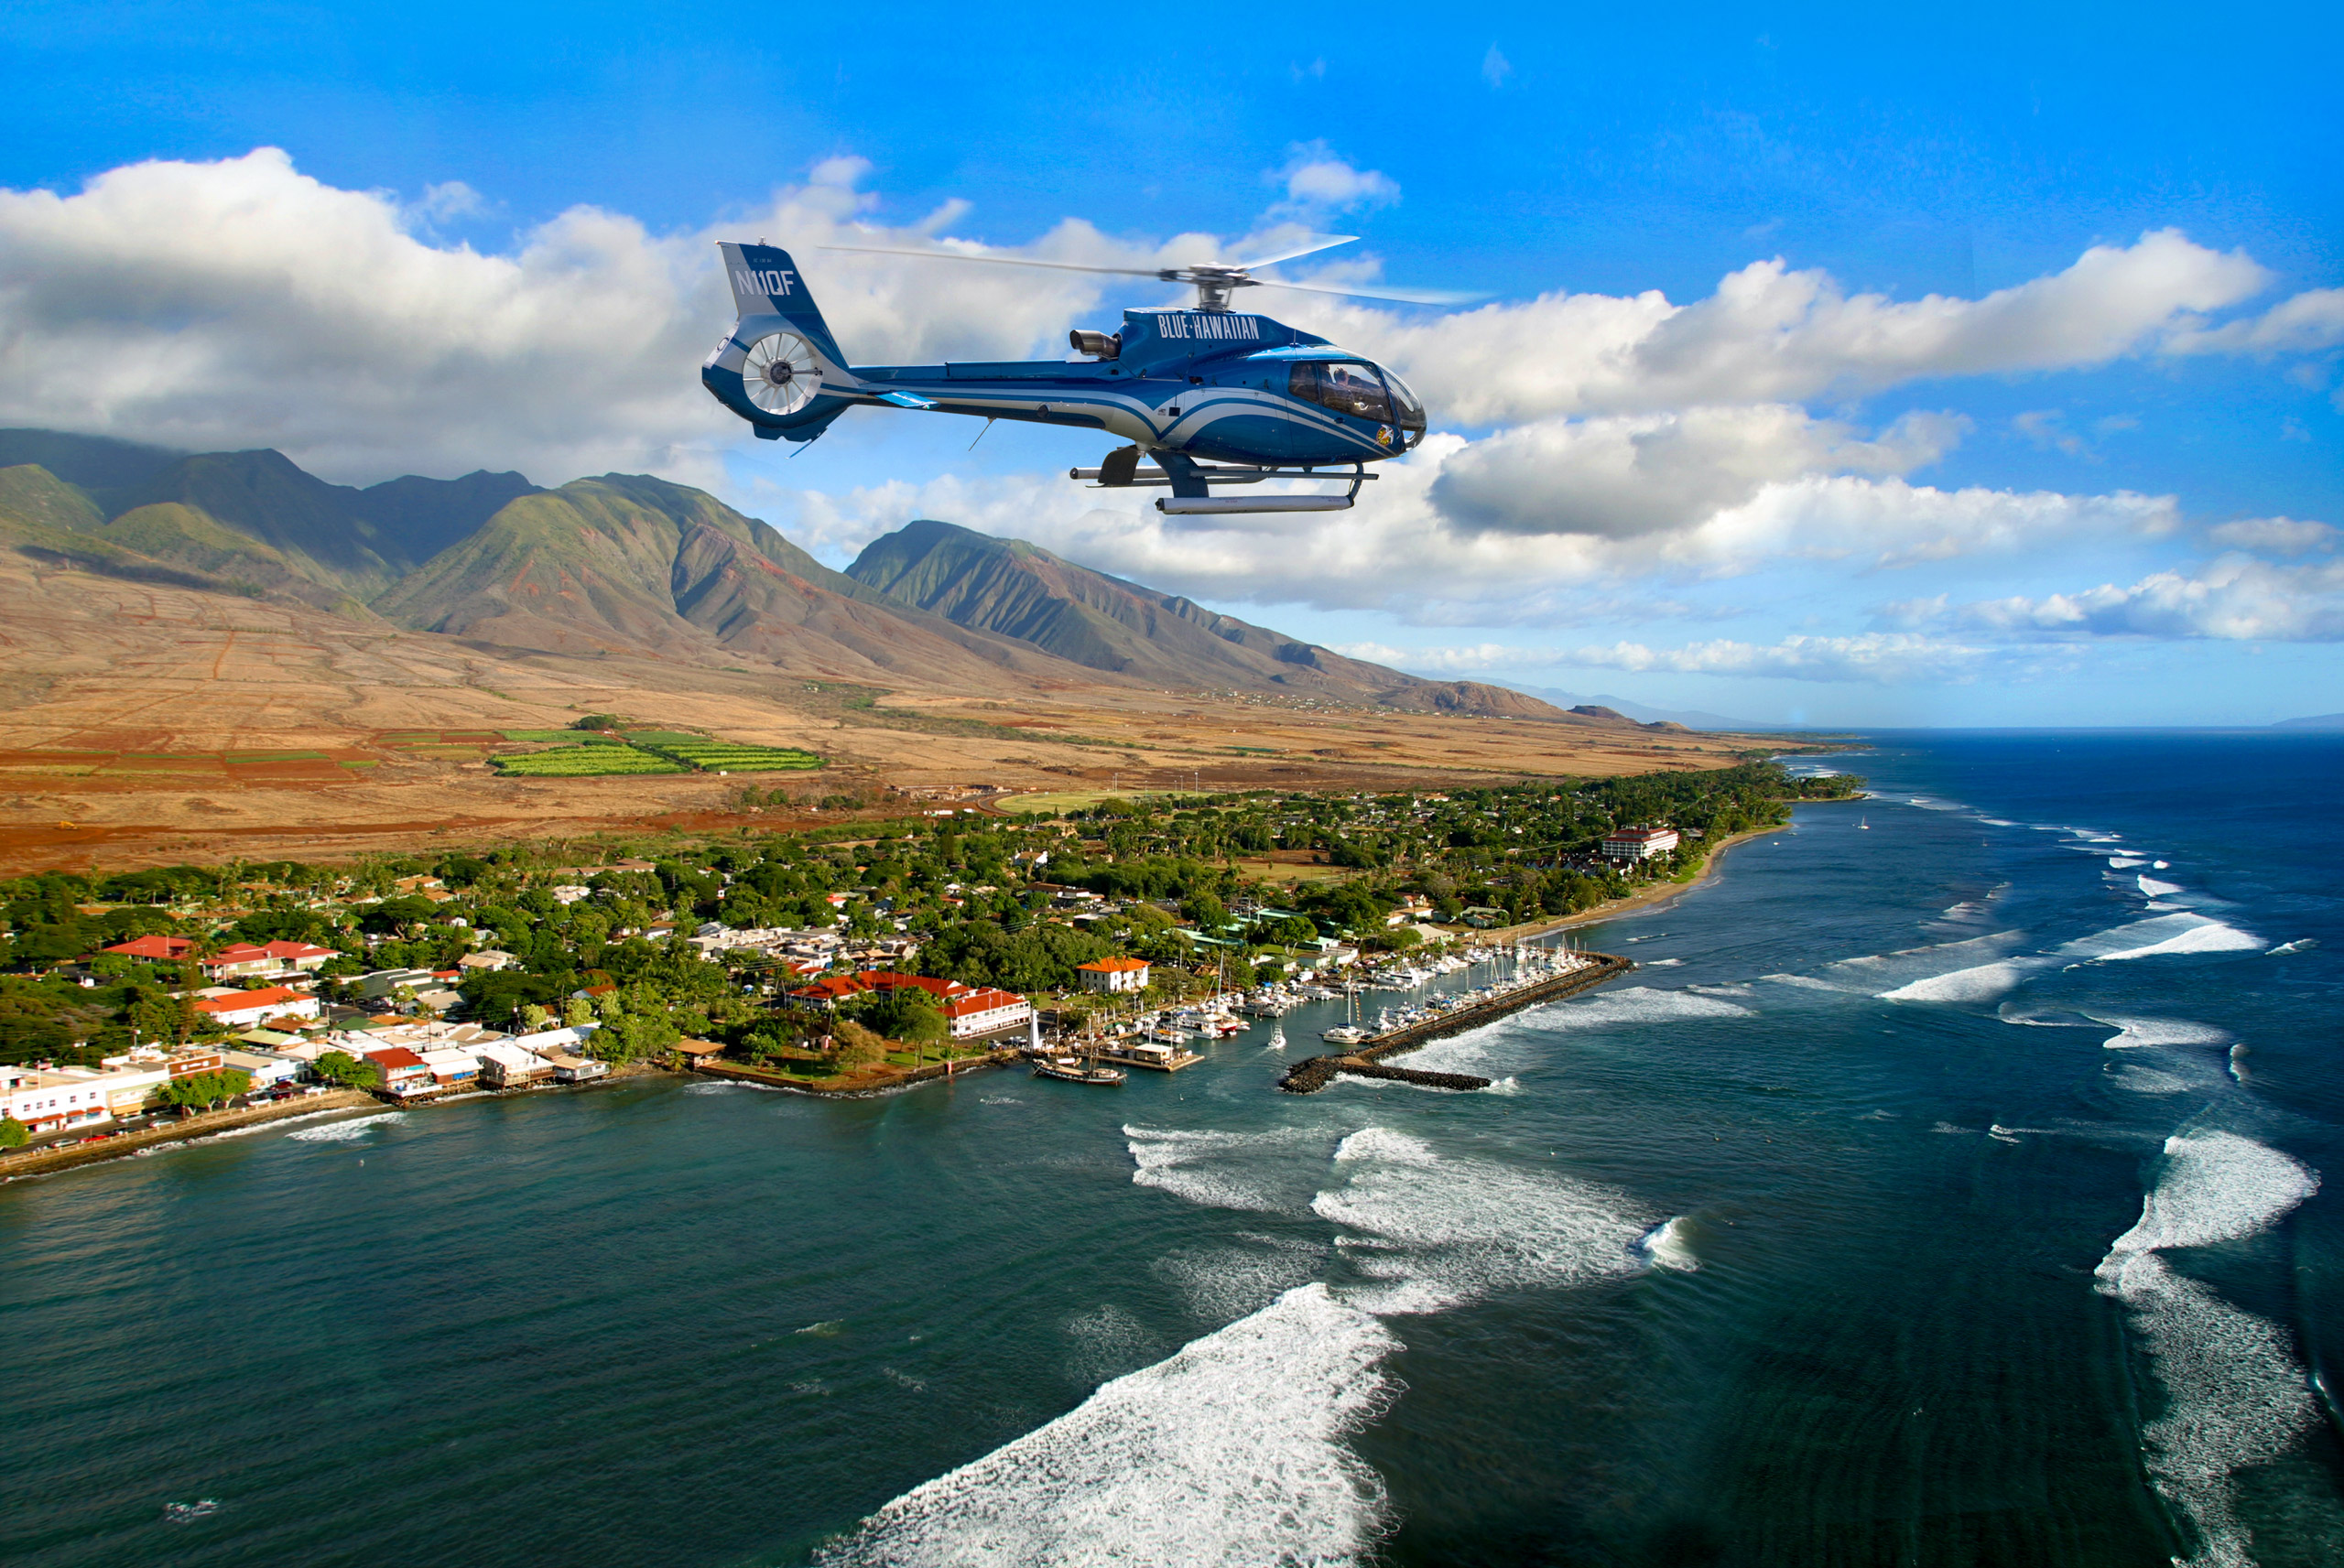 vaskepulver Accepteret stemme Blue Hawaiian Helicopters - Best Helicopter Tours in Hawaii